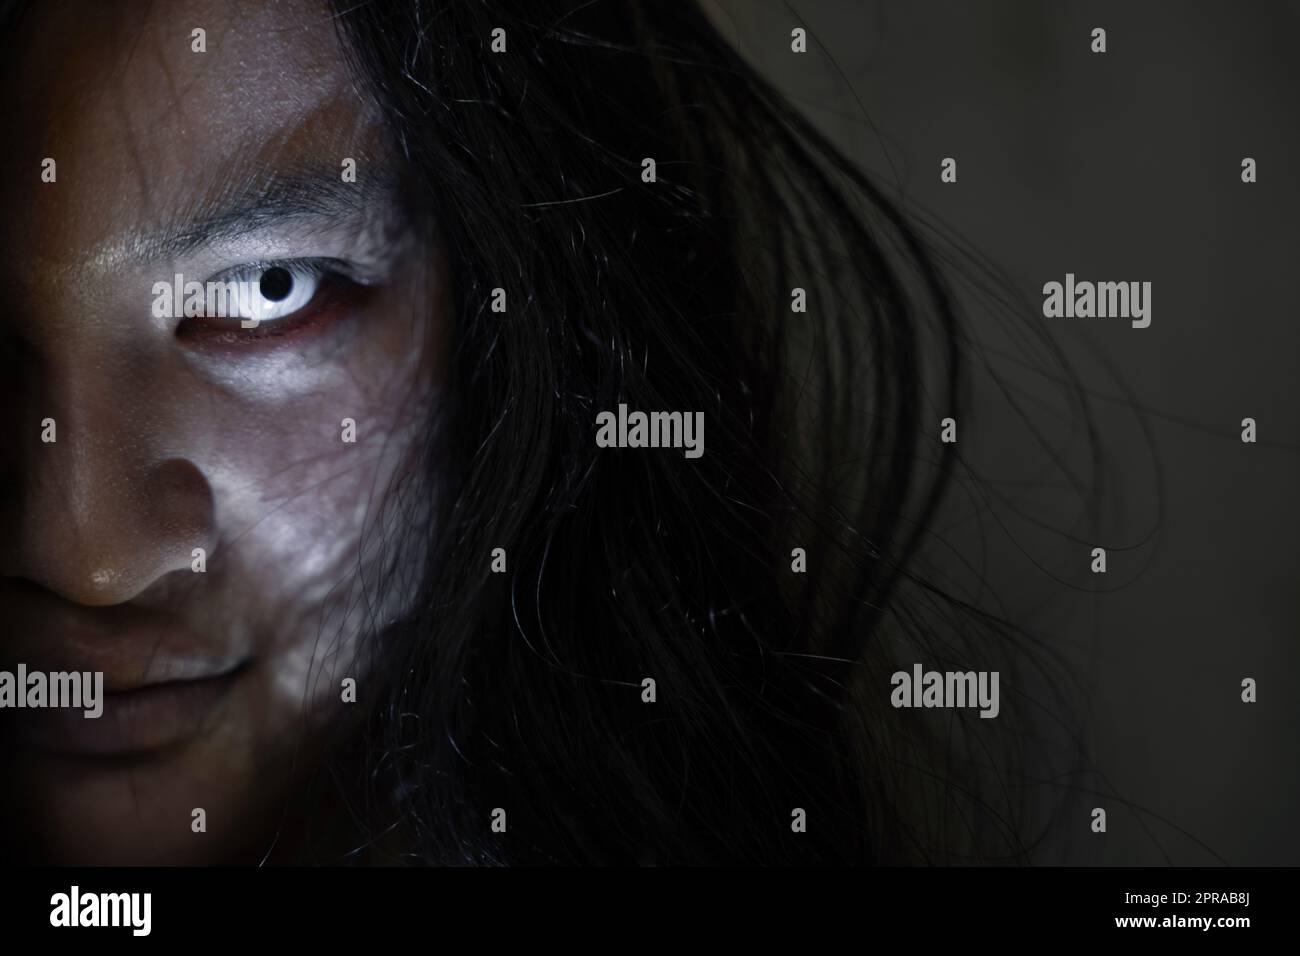 Close up face of Asian woman ghost or zombie horror creepy scary Stock Photo